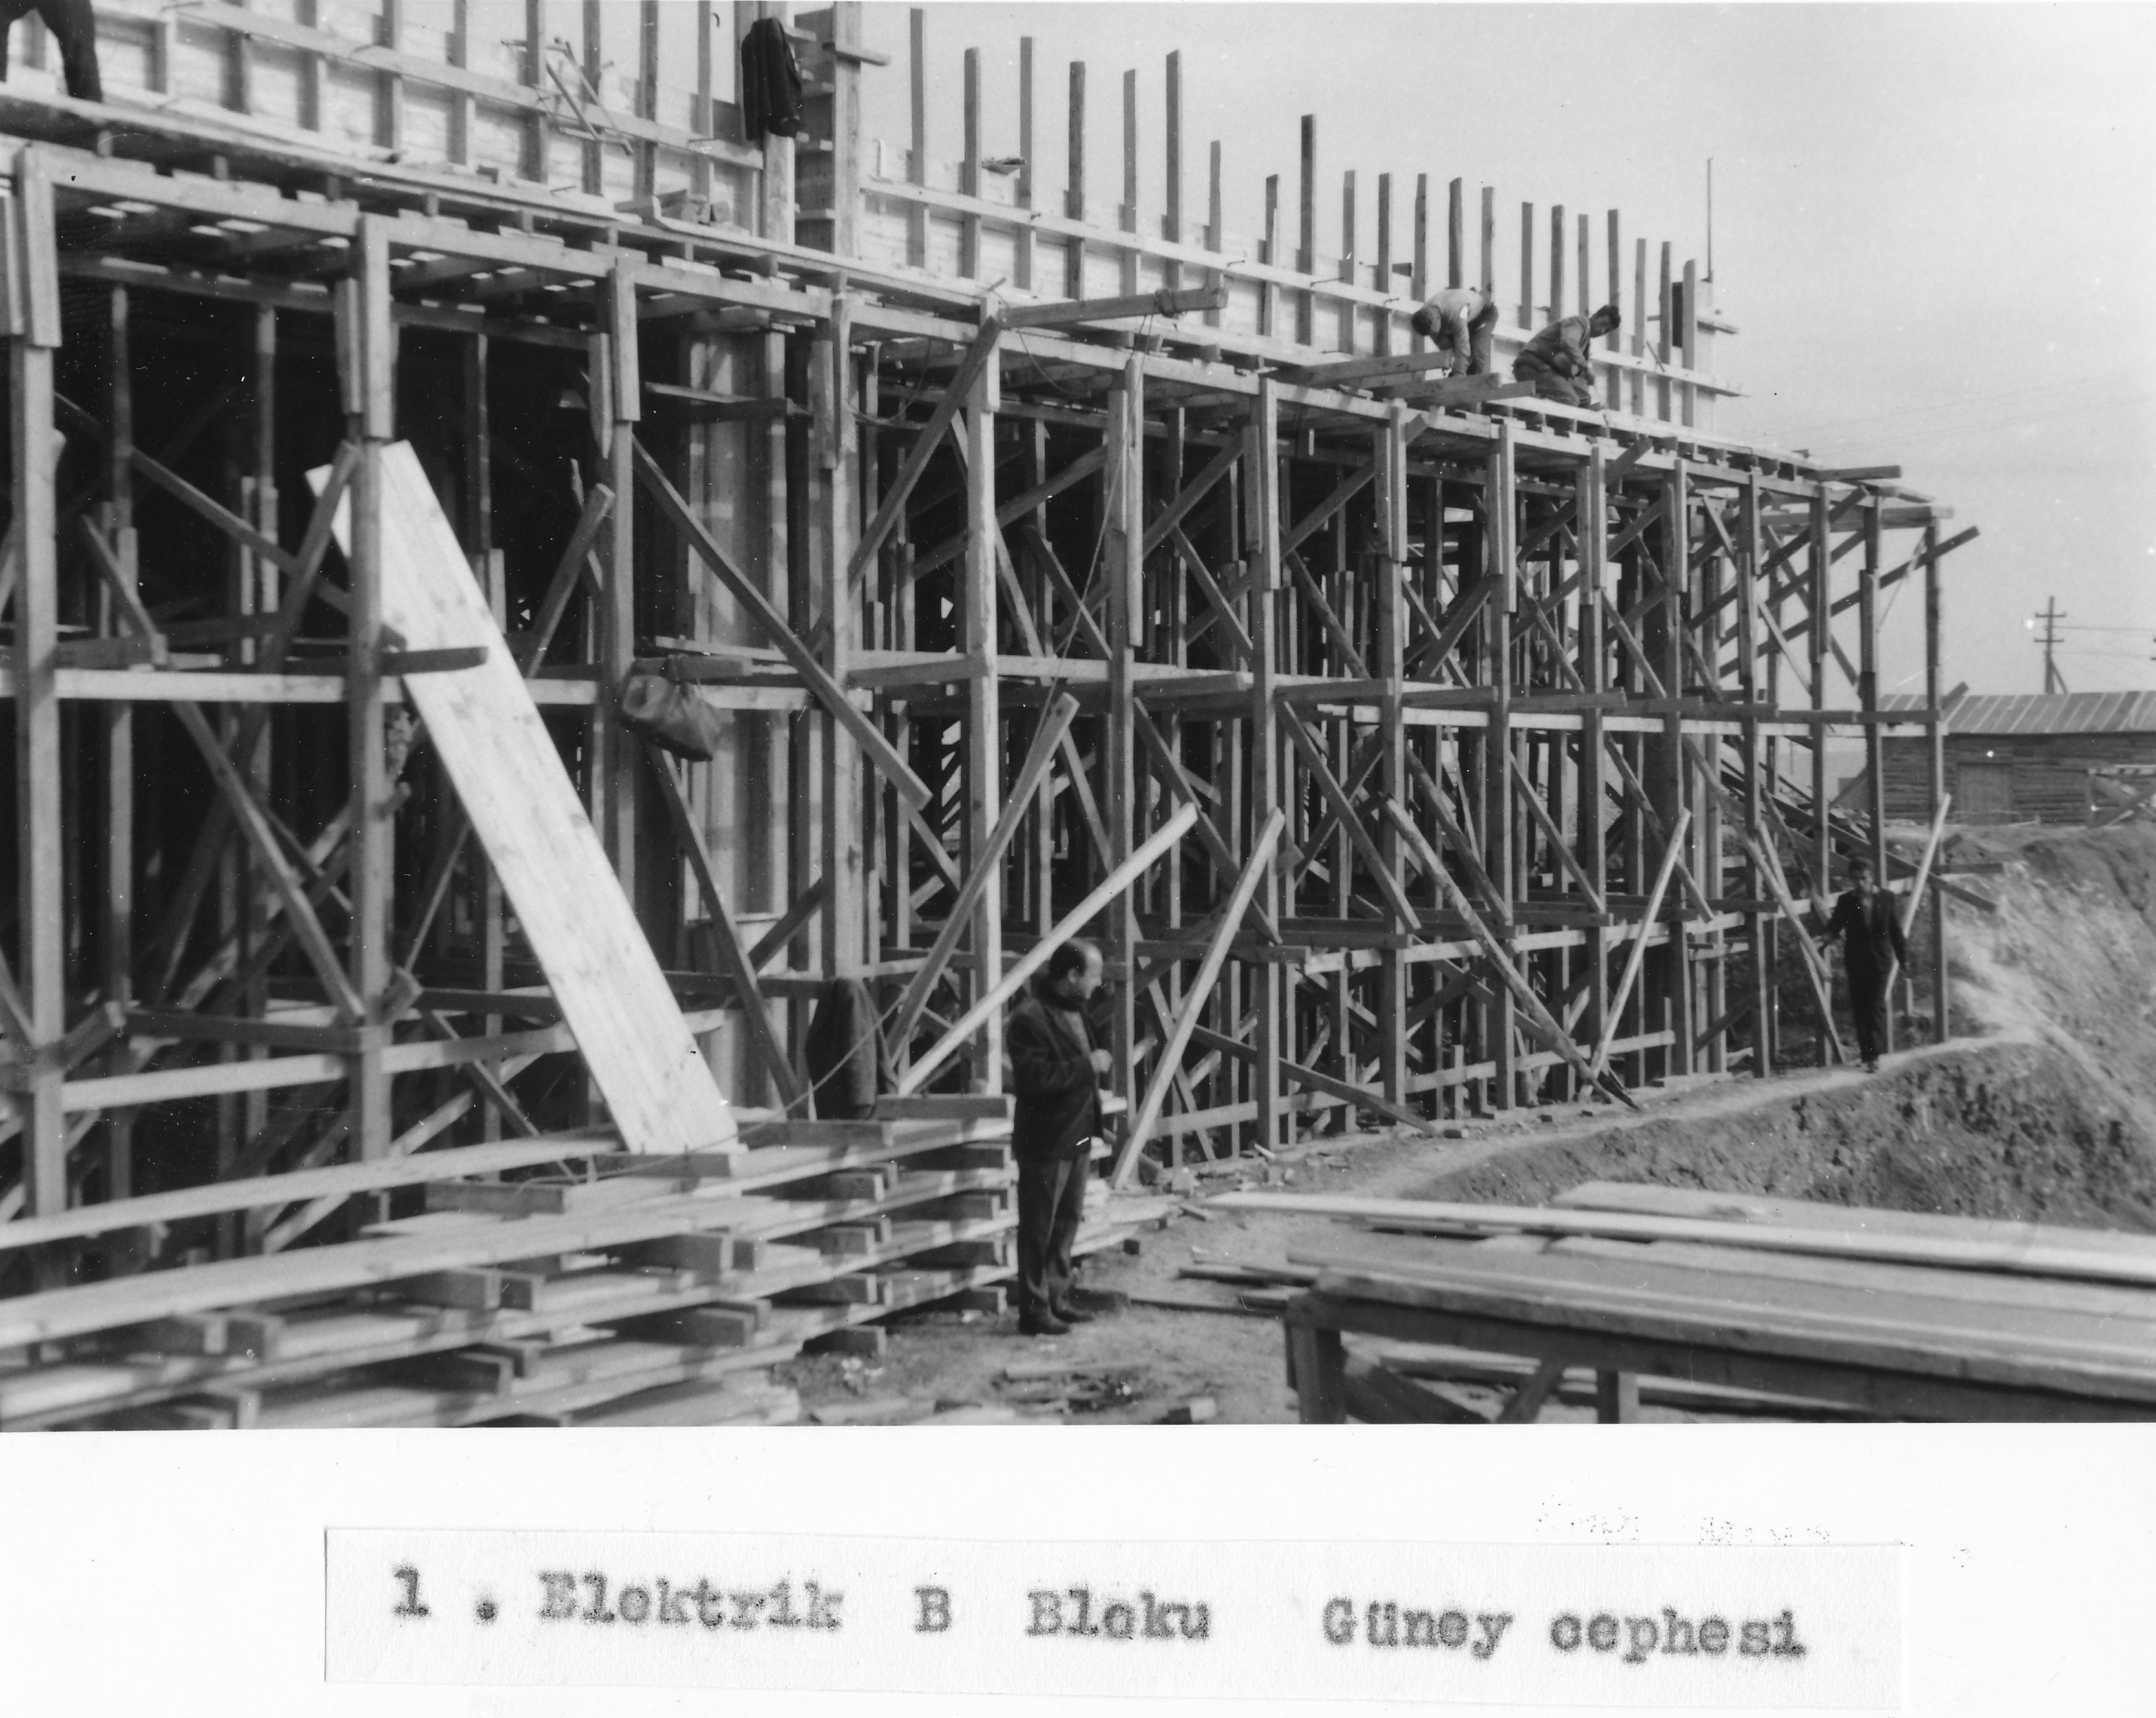 Electrical Engineering building construction (1964)